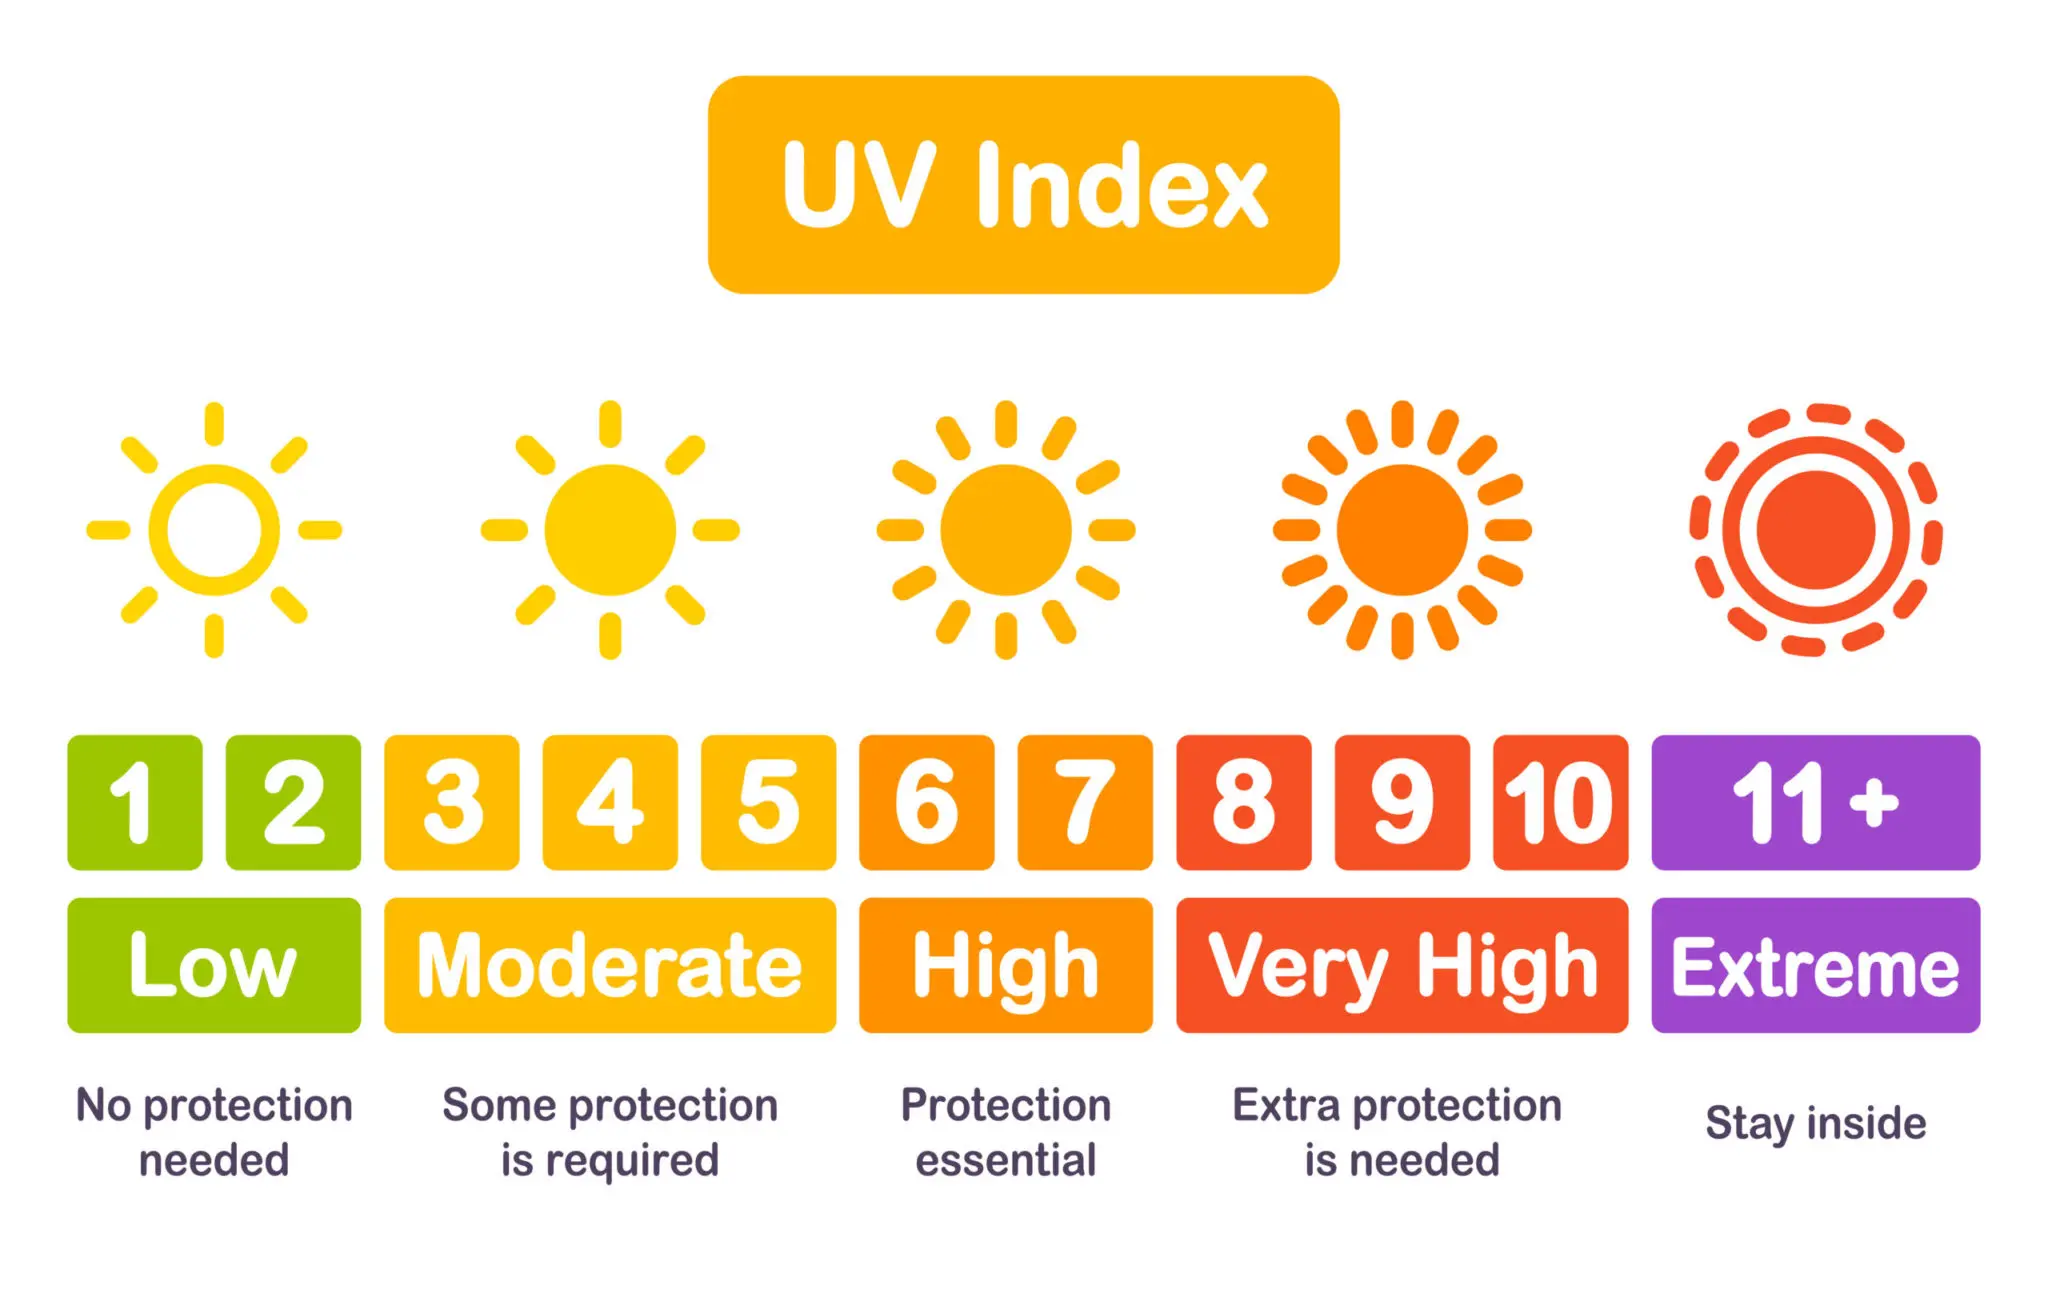 Whats the Best Uv Index to Tan in?